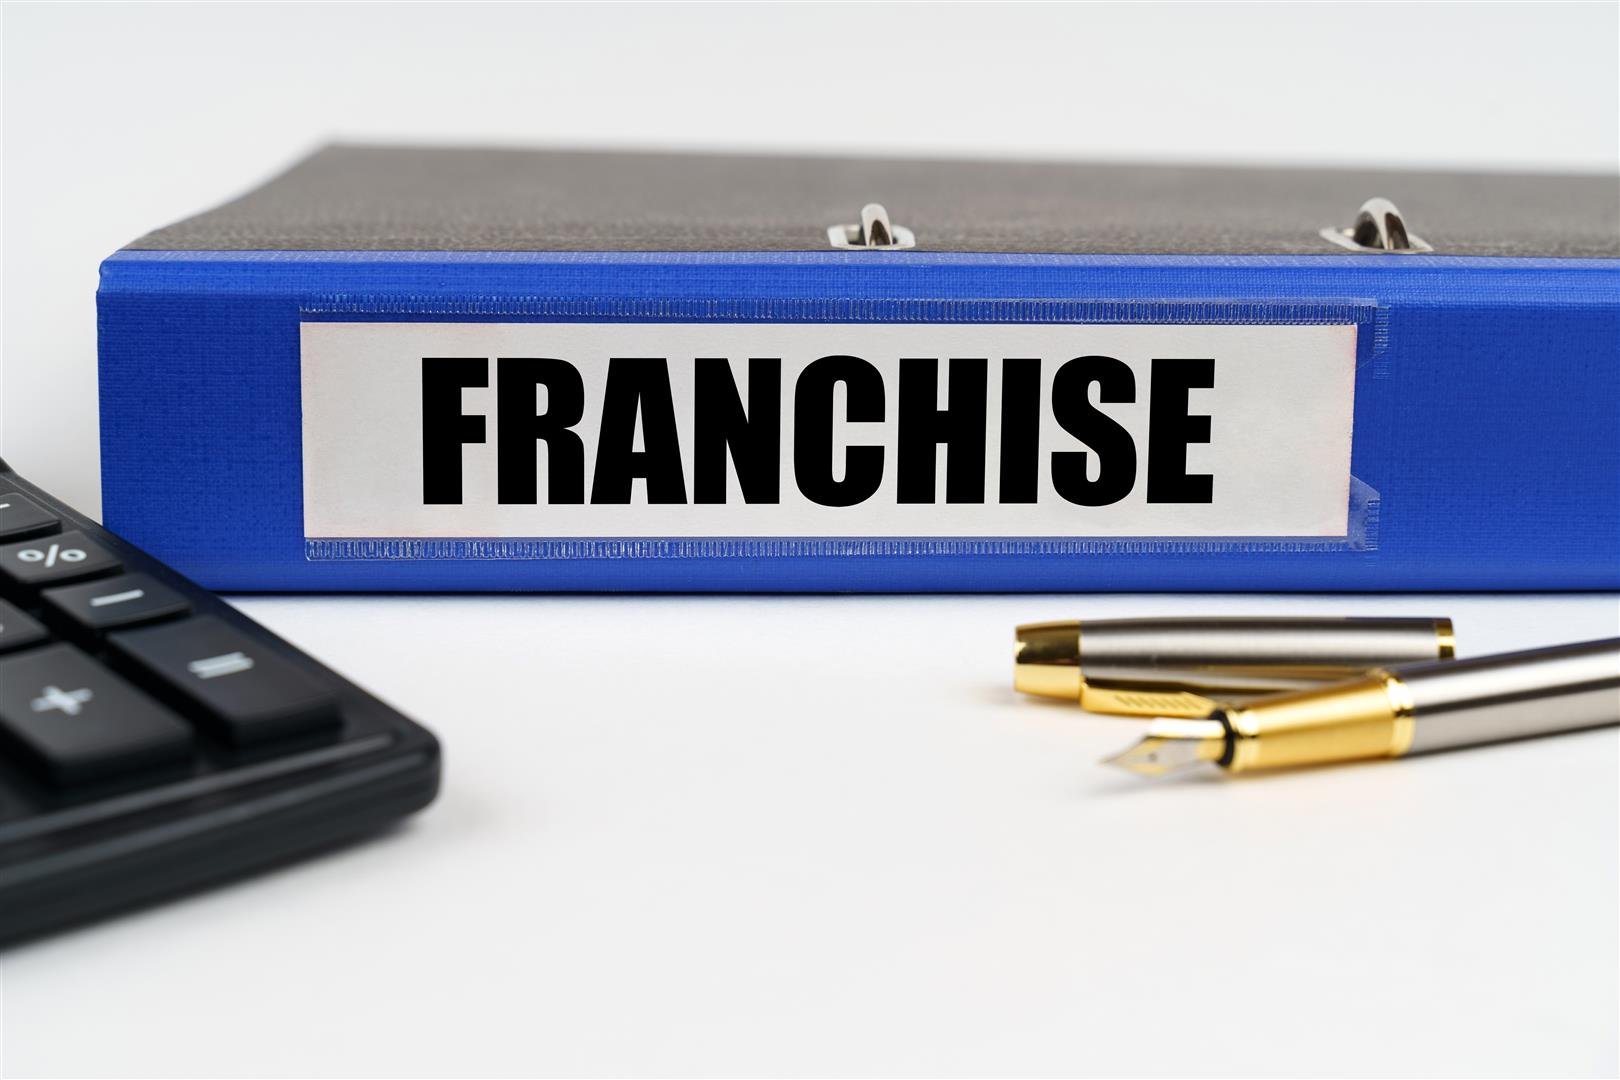 Franchising vs. Starting Your Own Business: Which Is Best?